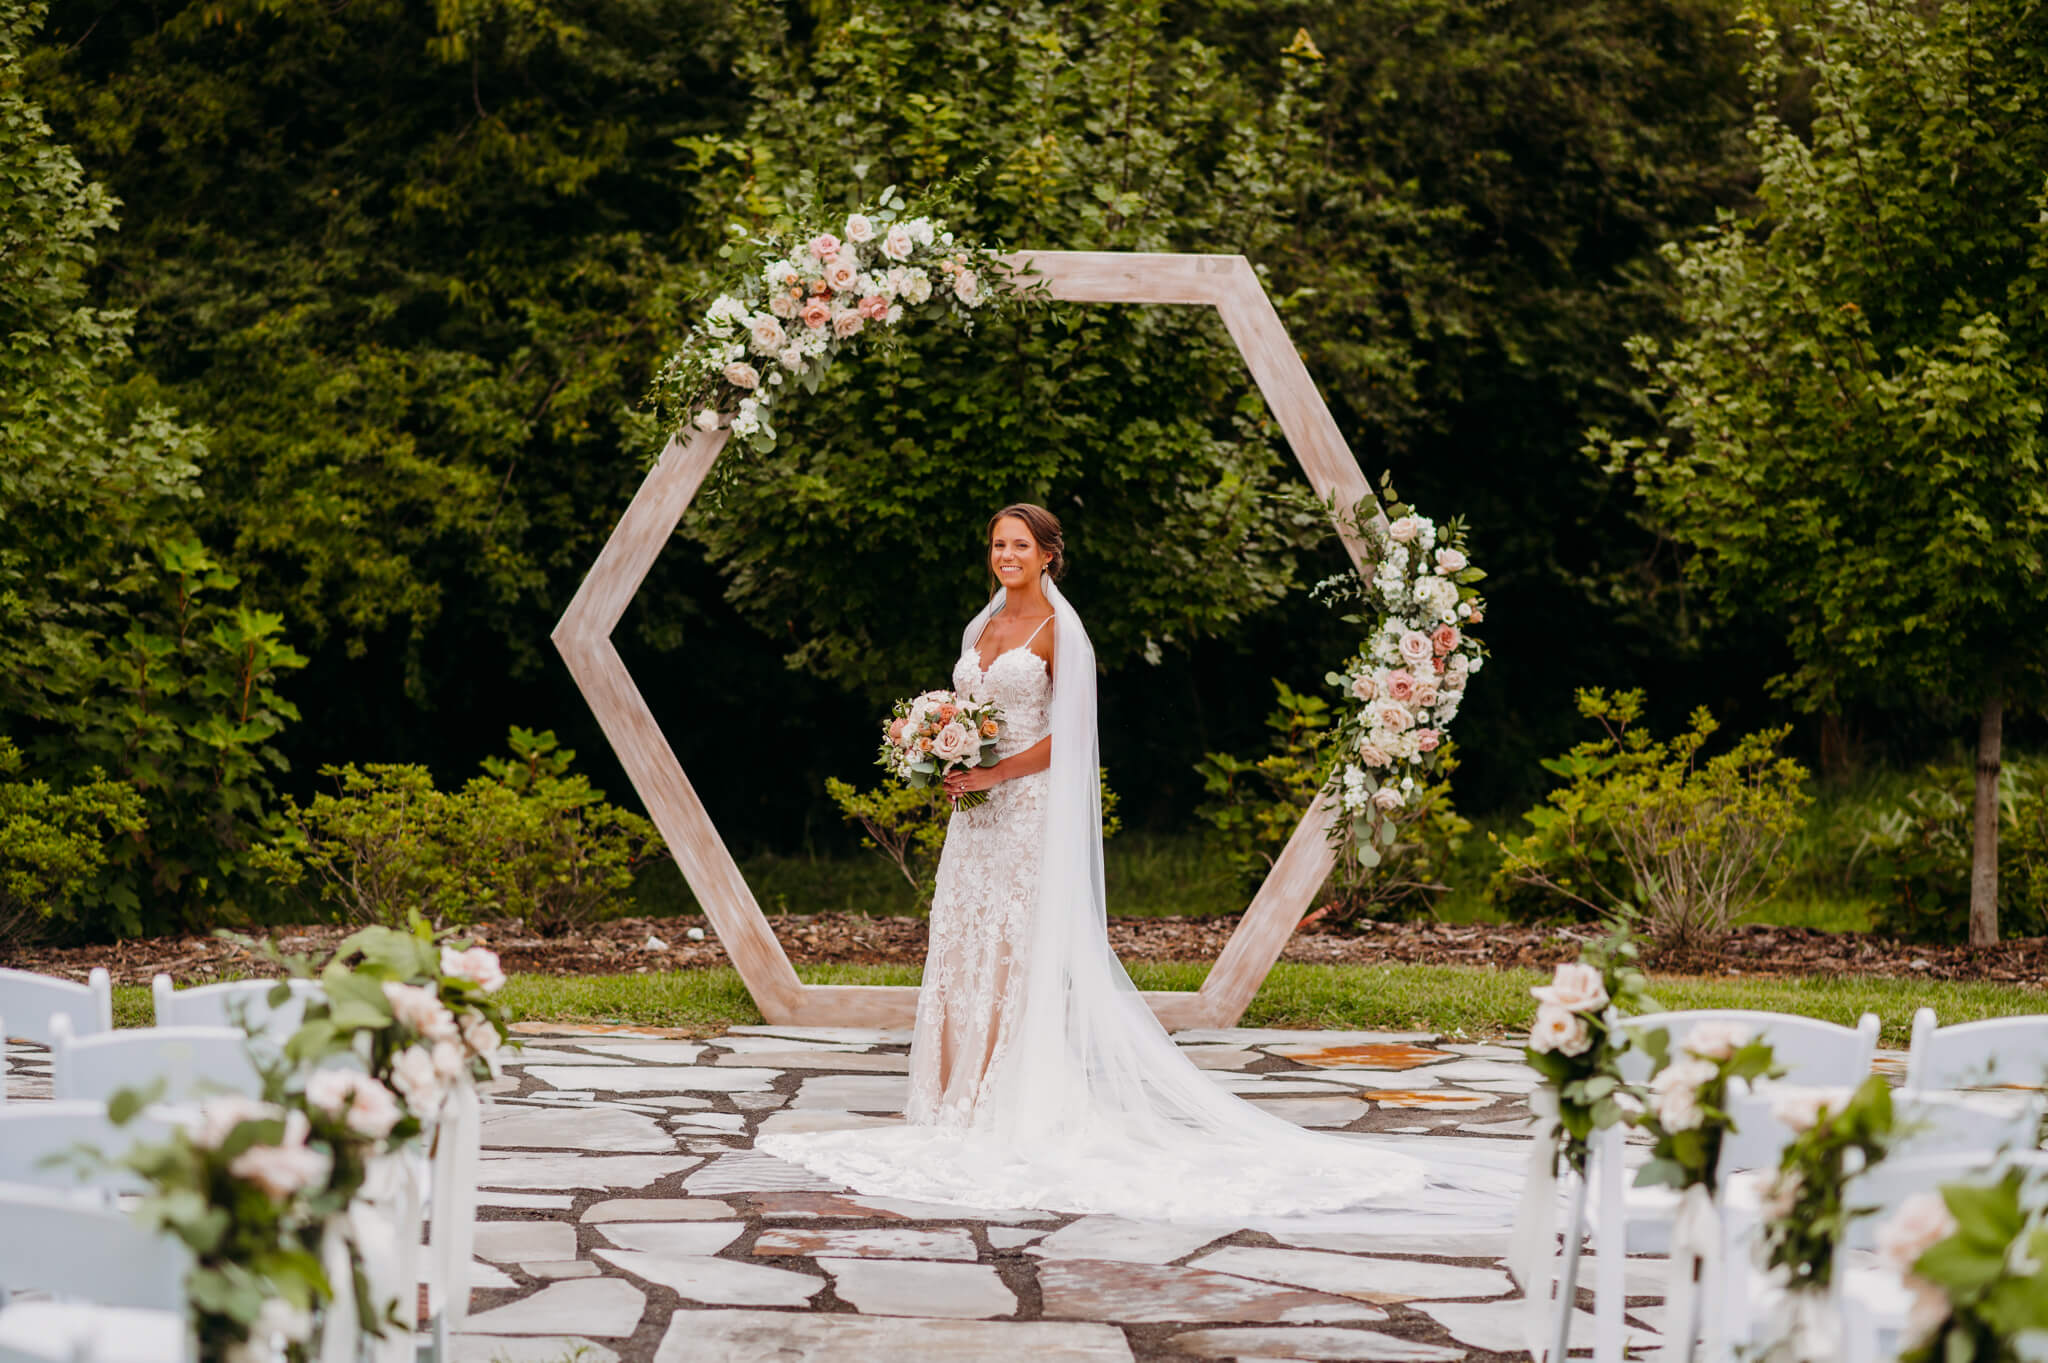 photo of a bride on a stone path with arch in the background